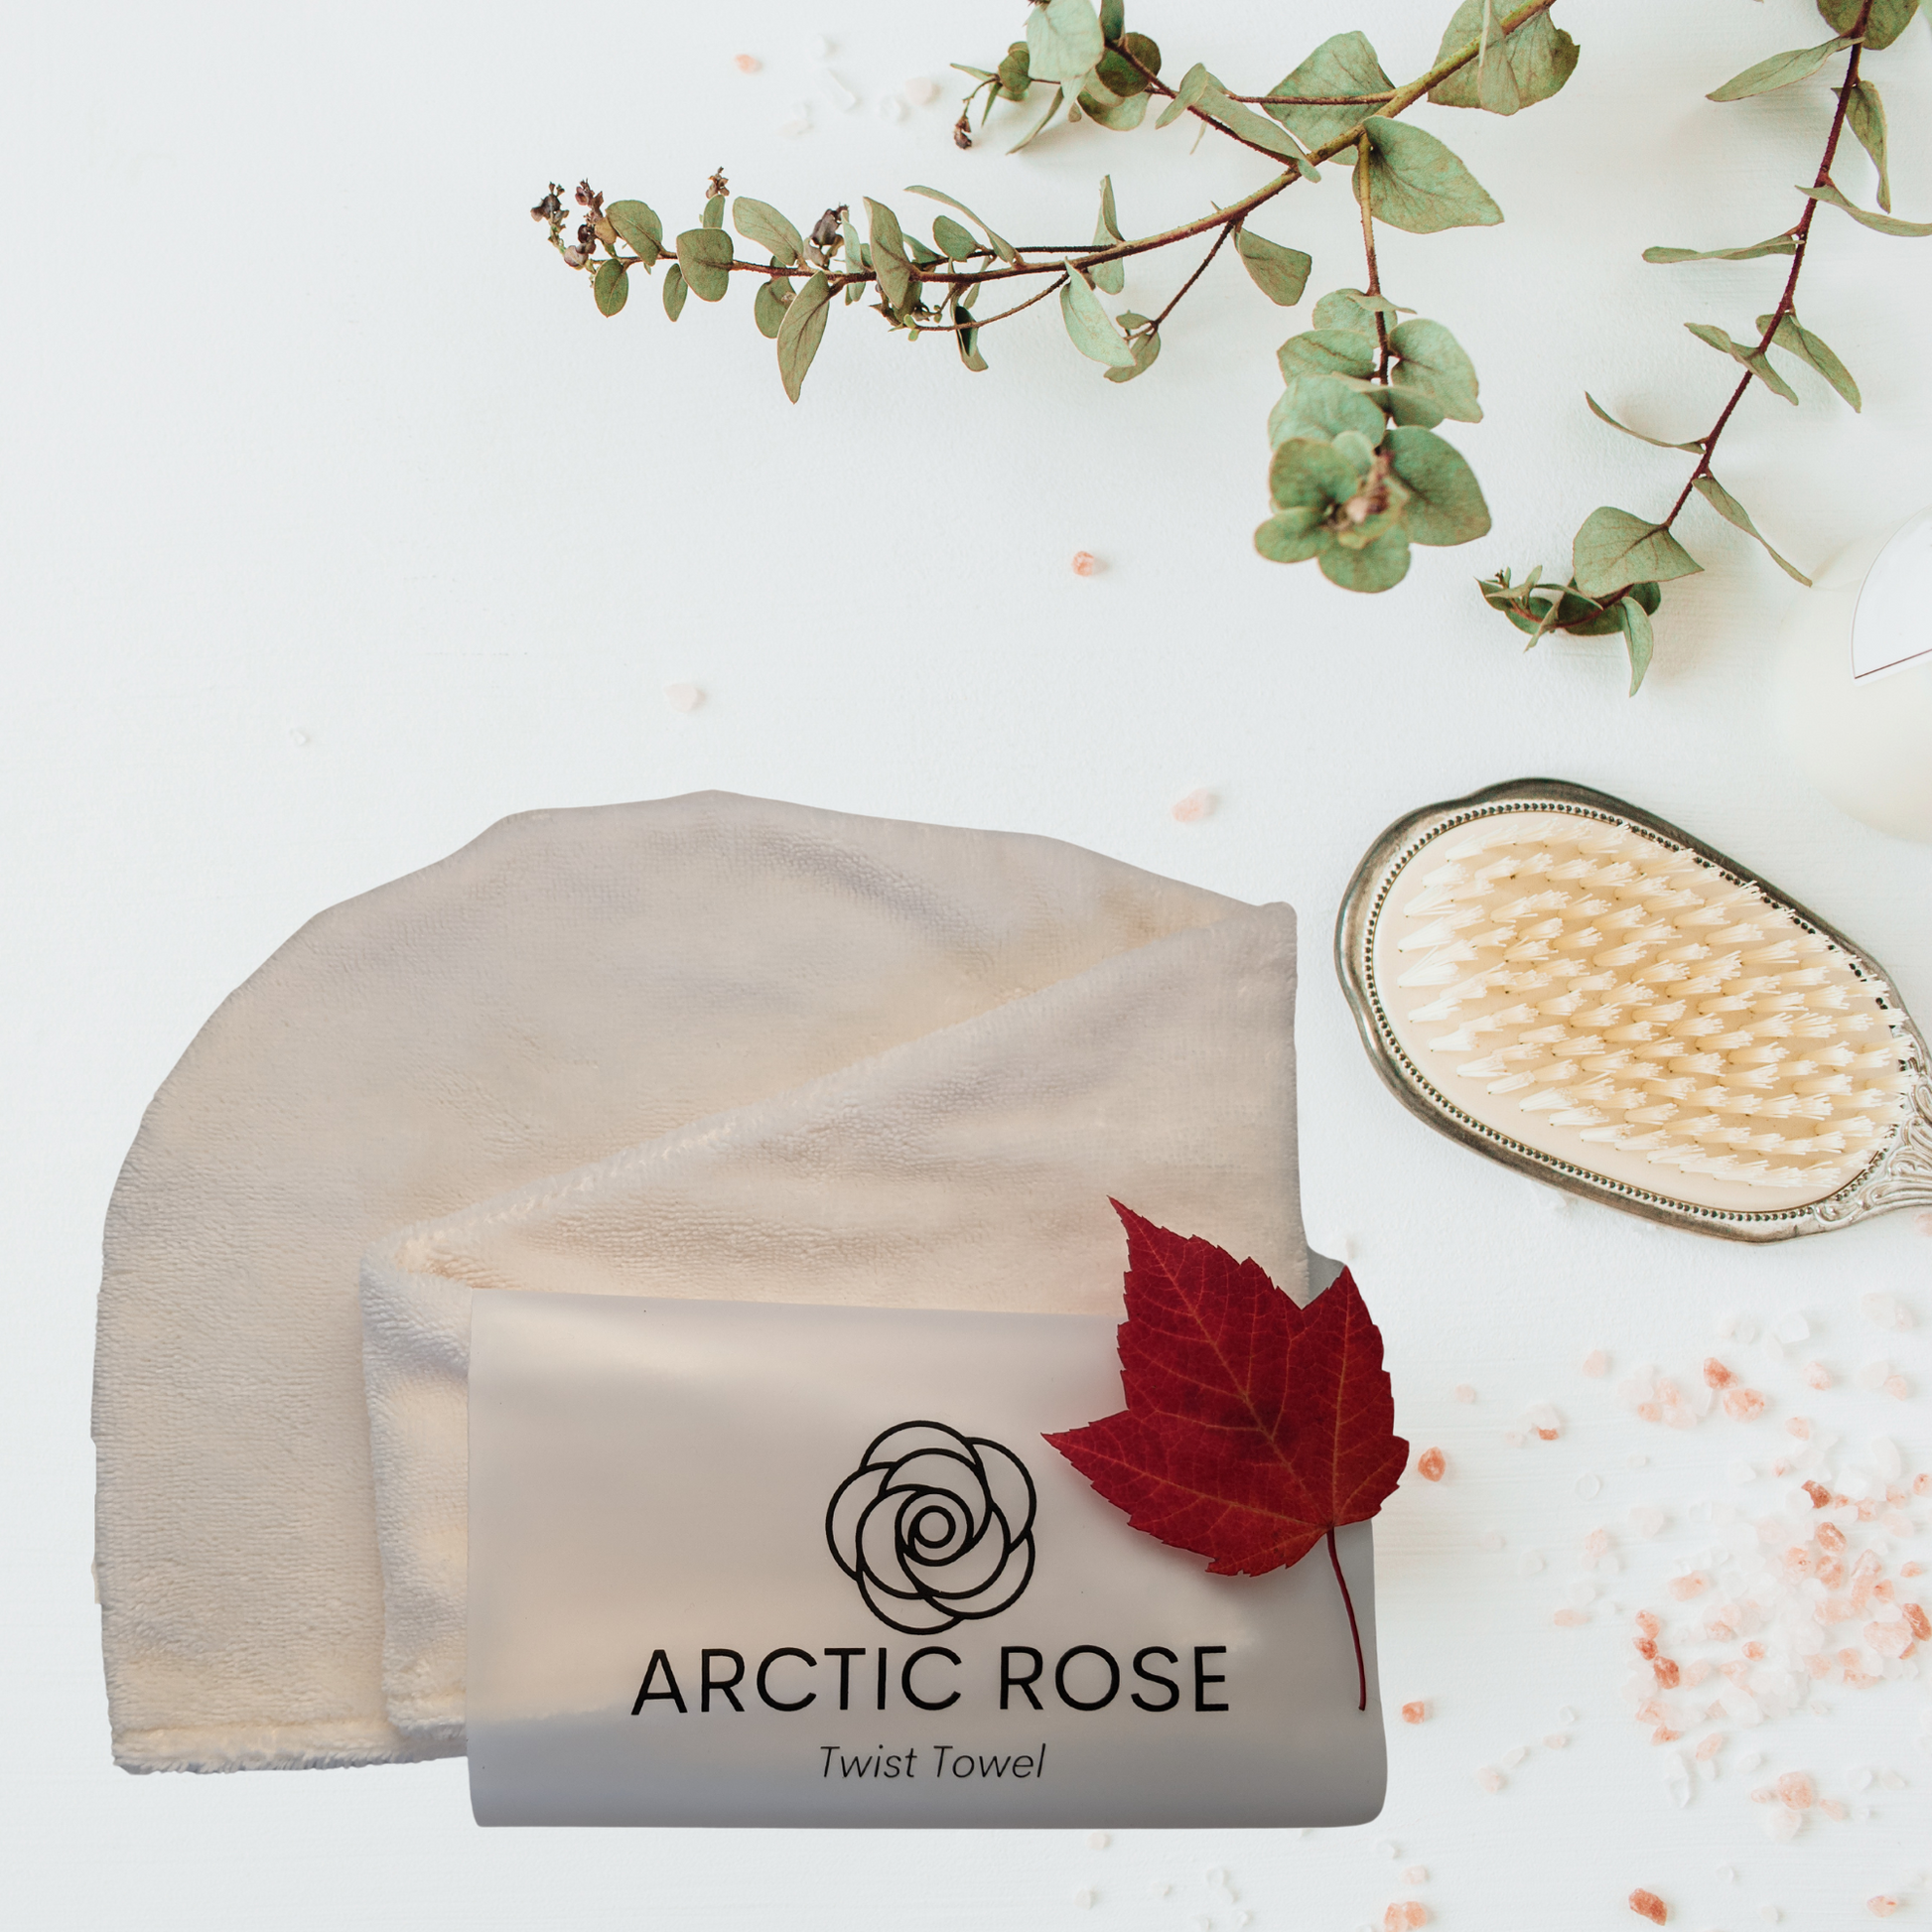 arctic rose hair towel made in Canada handmade the perfect gift for women 